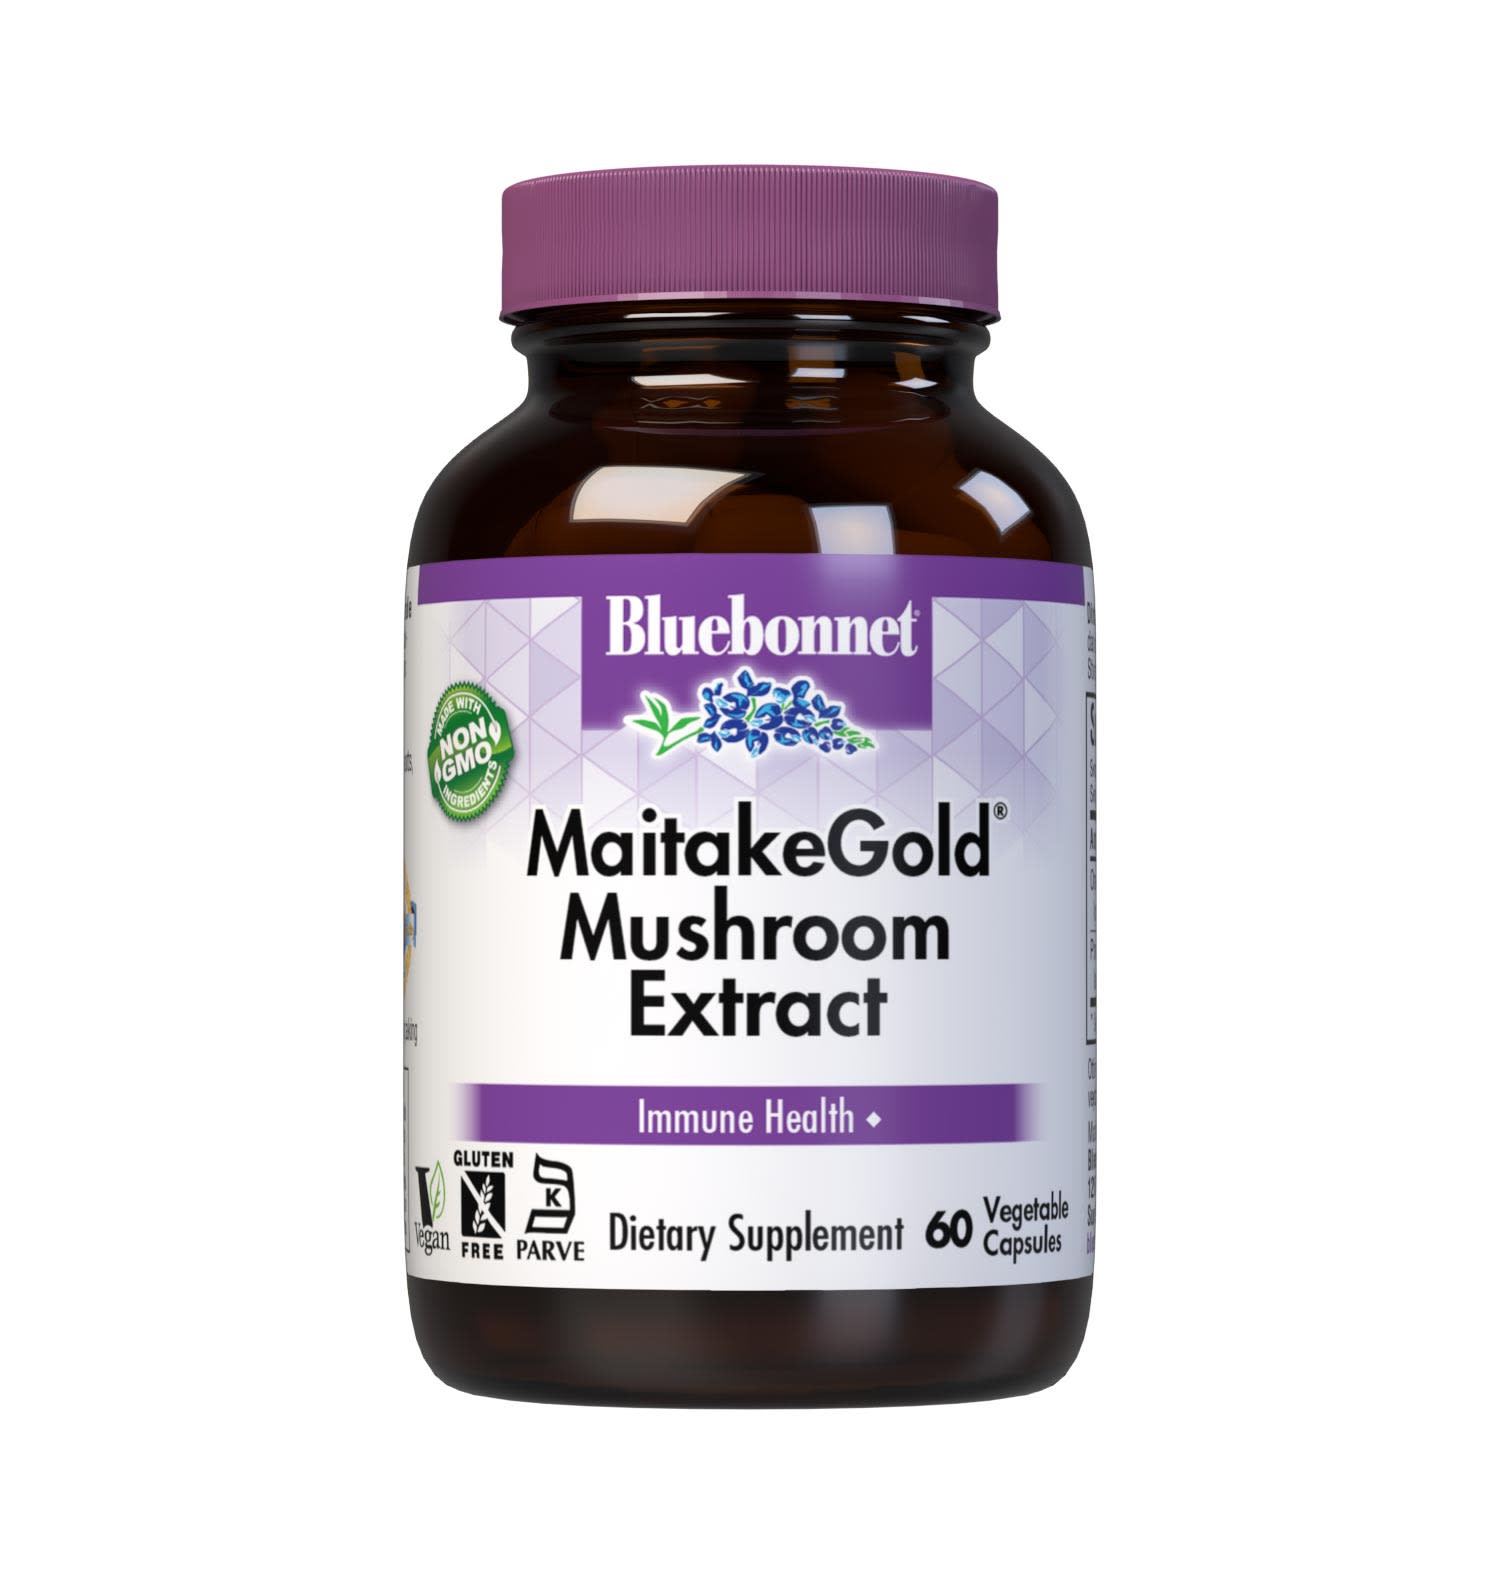 Bluebonnet’s MaitakeGold Mushroom Extract 60 Vegetable Capsules have been expertly formulated with a combination of clinically studied, patented MaitakeGold 404 extract with organic whole maitake mycelia grown on brown rice to support immune health. #size_60 count